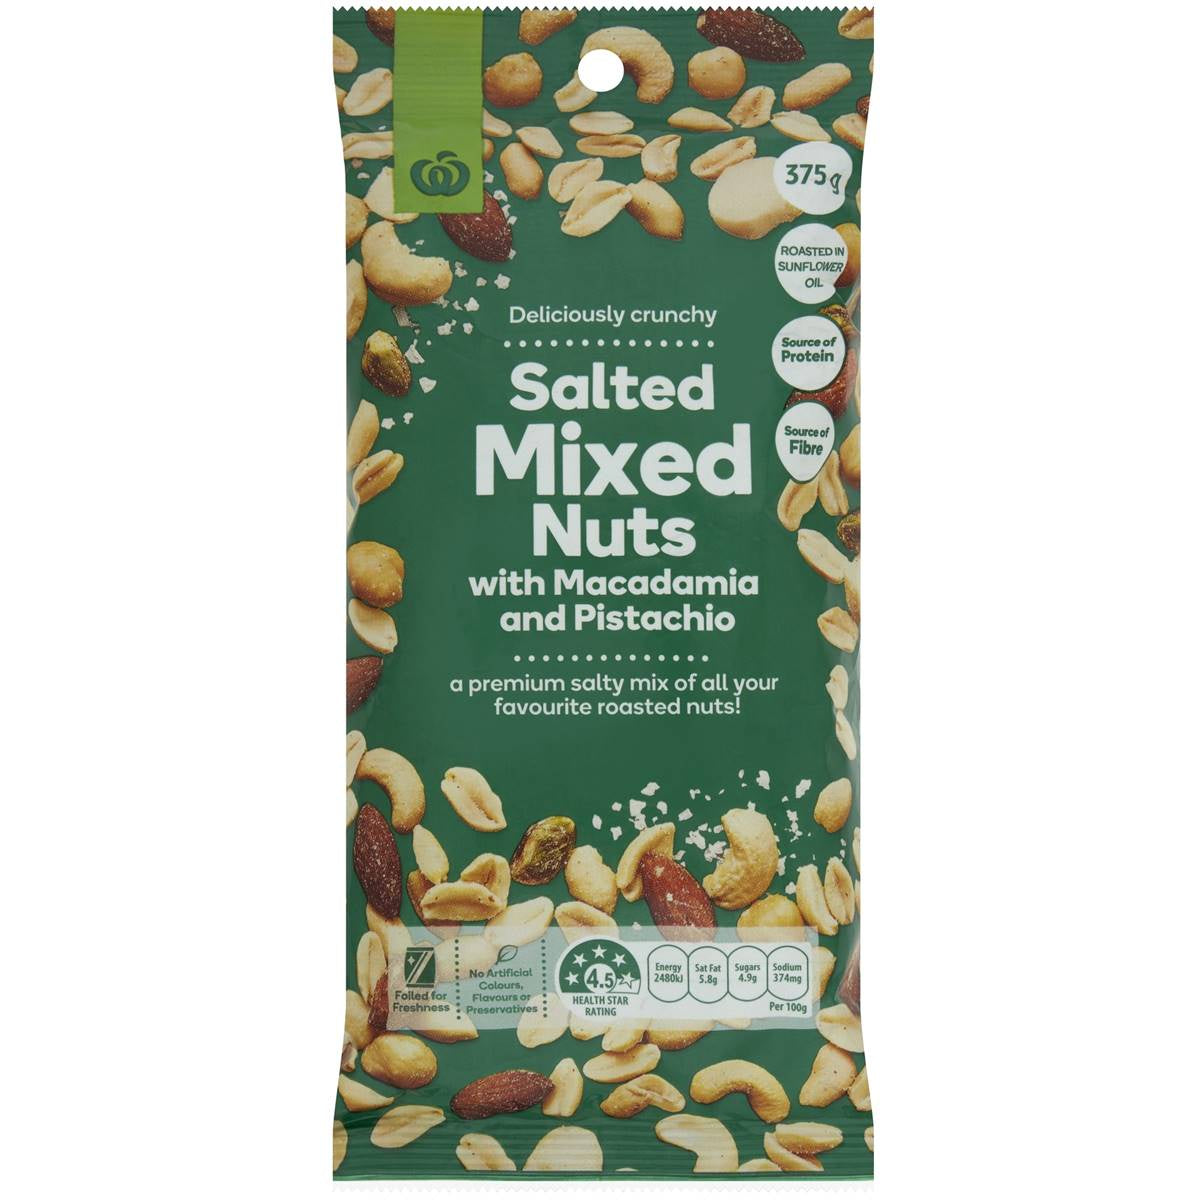 Salted Mixed Nuts with Macadamia & Pistachio 375g